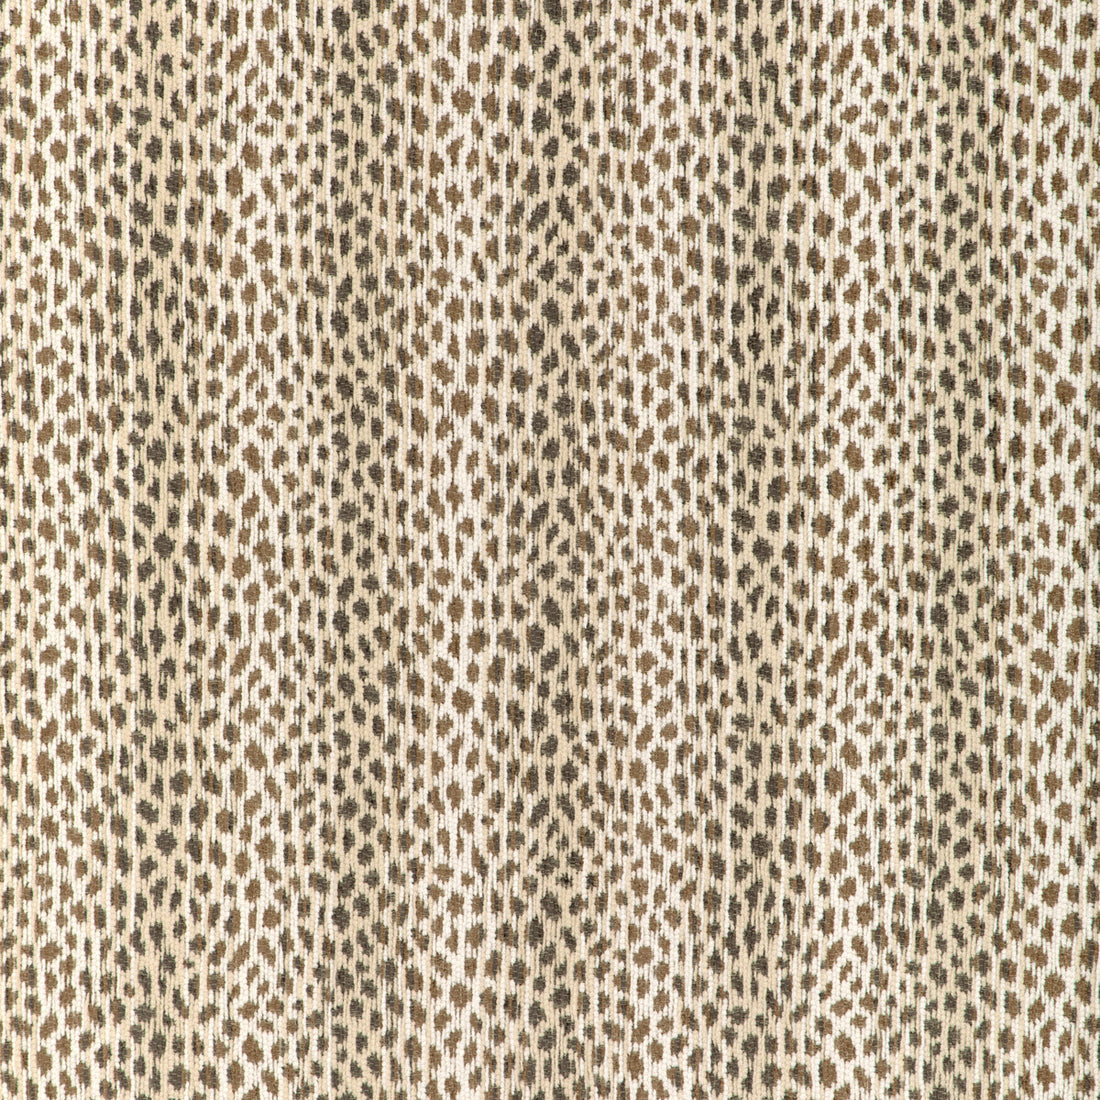 Kravet Design fabric in 37192-612 color - pattern 37192.612.0 - by Kravet Design in the Woven Colors collection